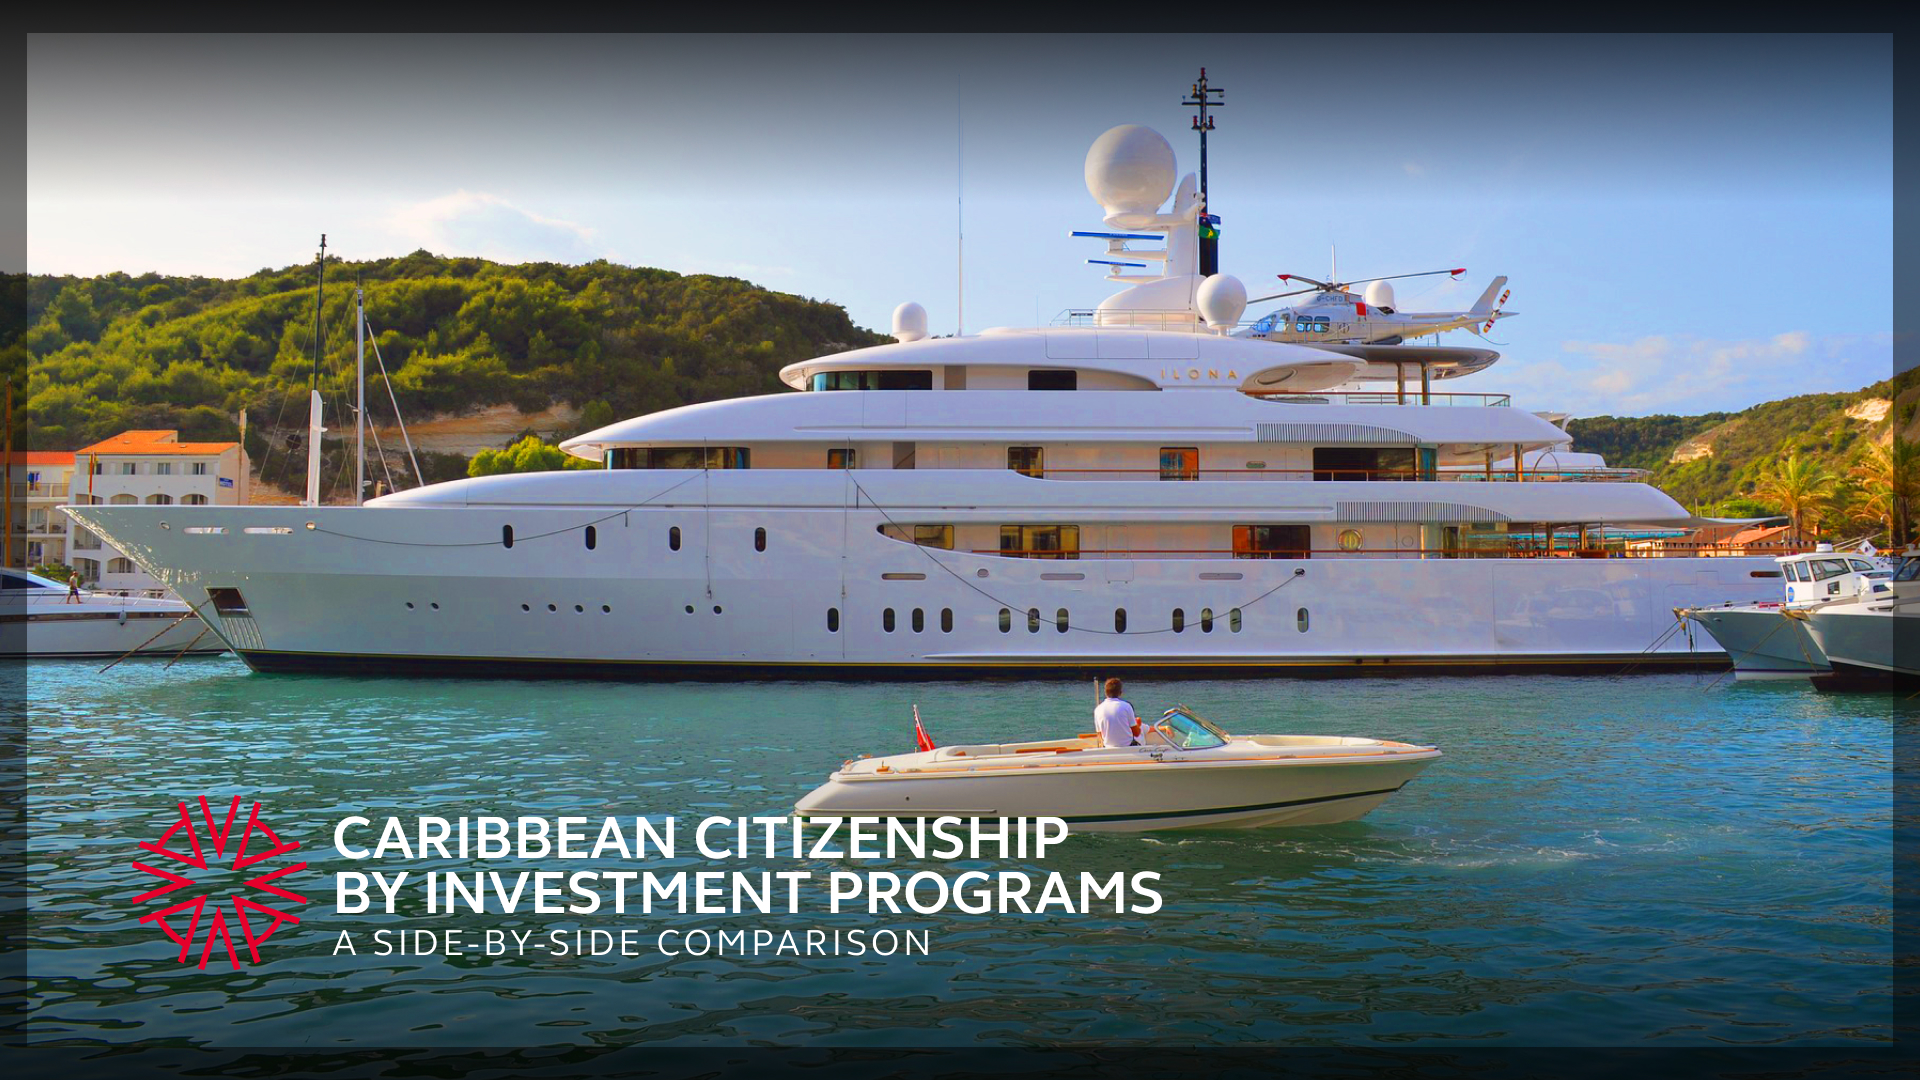 The comparison of a yacht next to a superyacht as a symbol of the differences between the Caribbean citizenship by investment programs